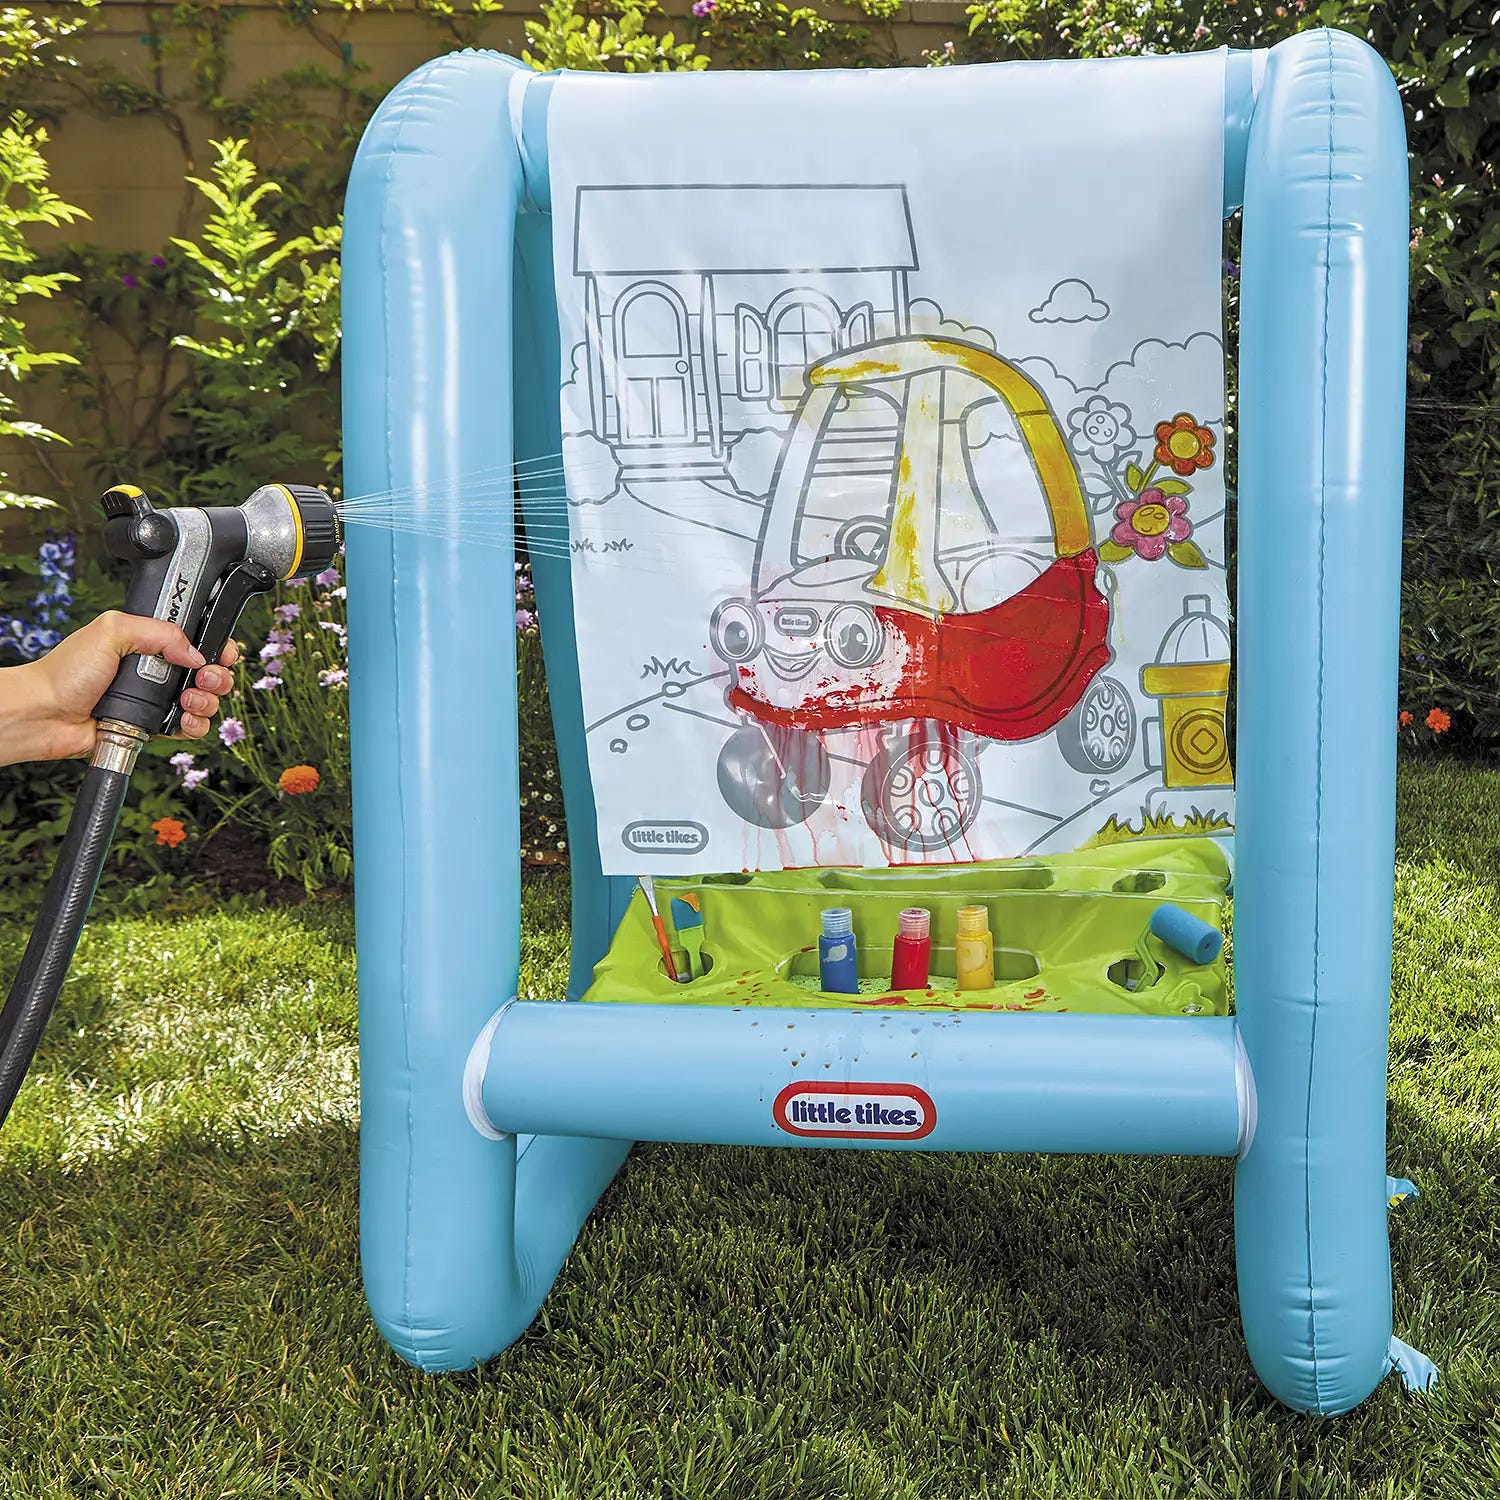 An inflatable easel with a partially colored canvas and paint containers, being hosed down for cleaning.